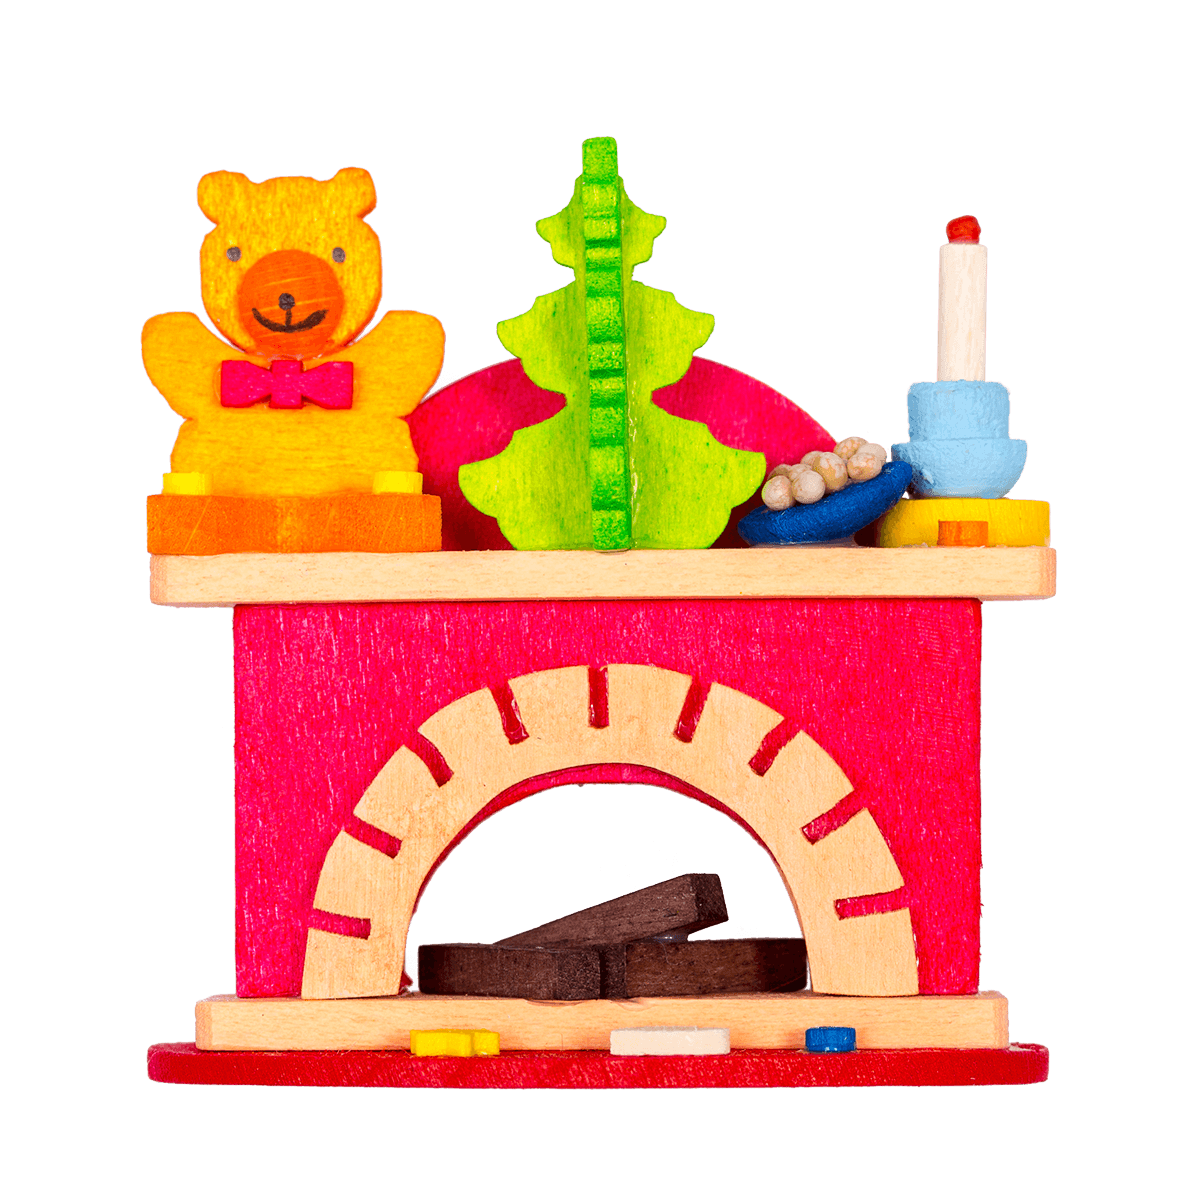 Small Fireplace Ornament with teddy